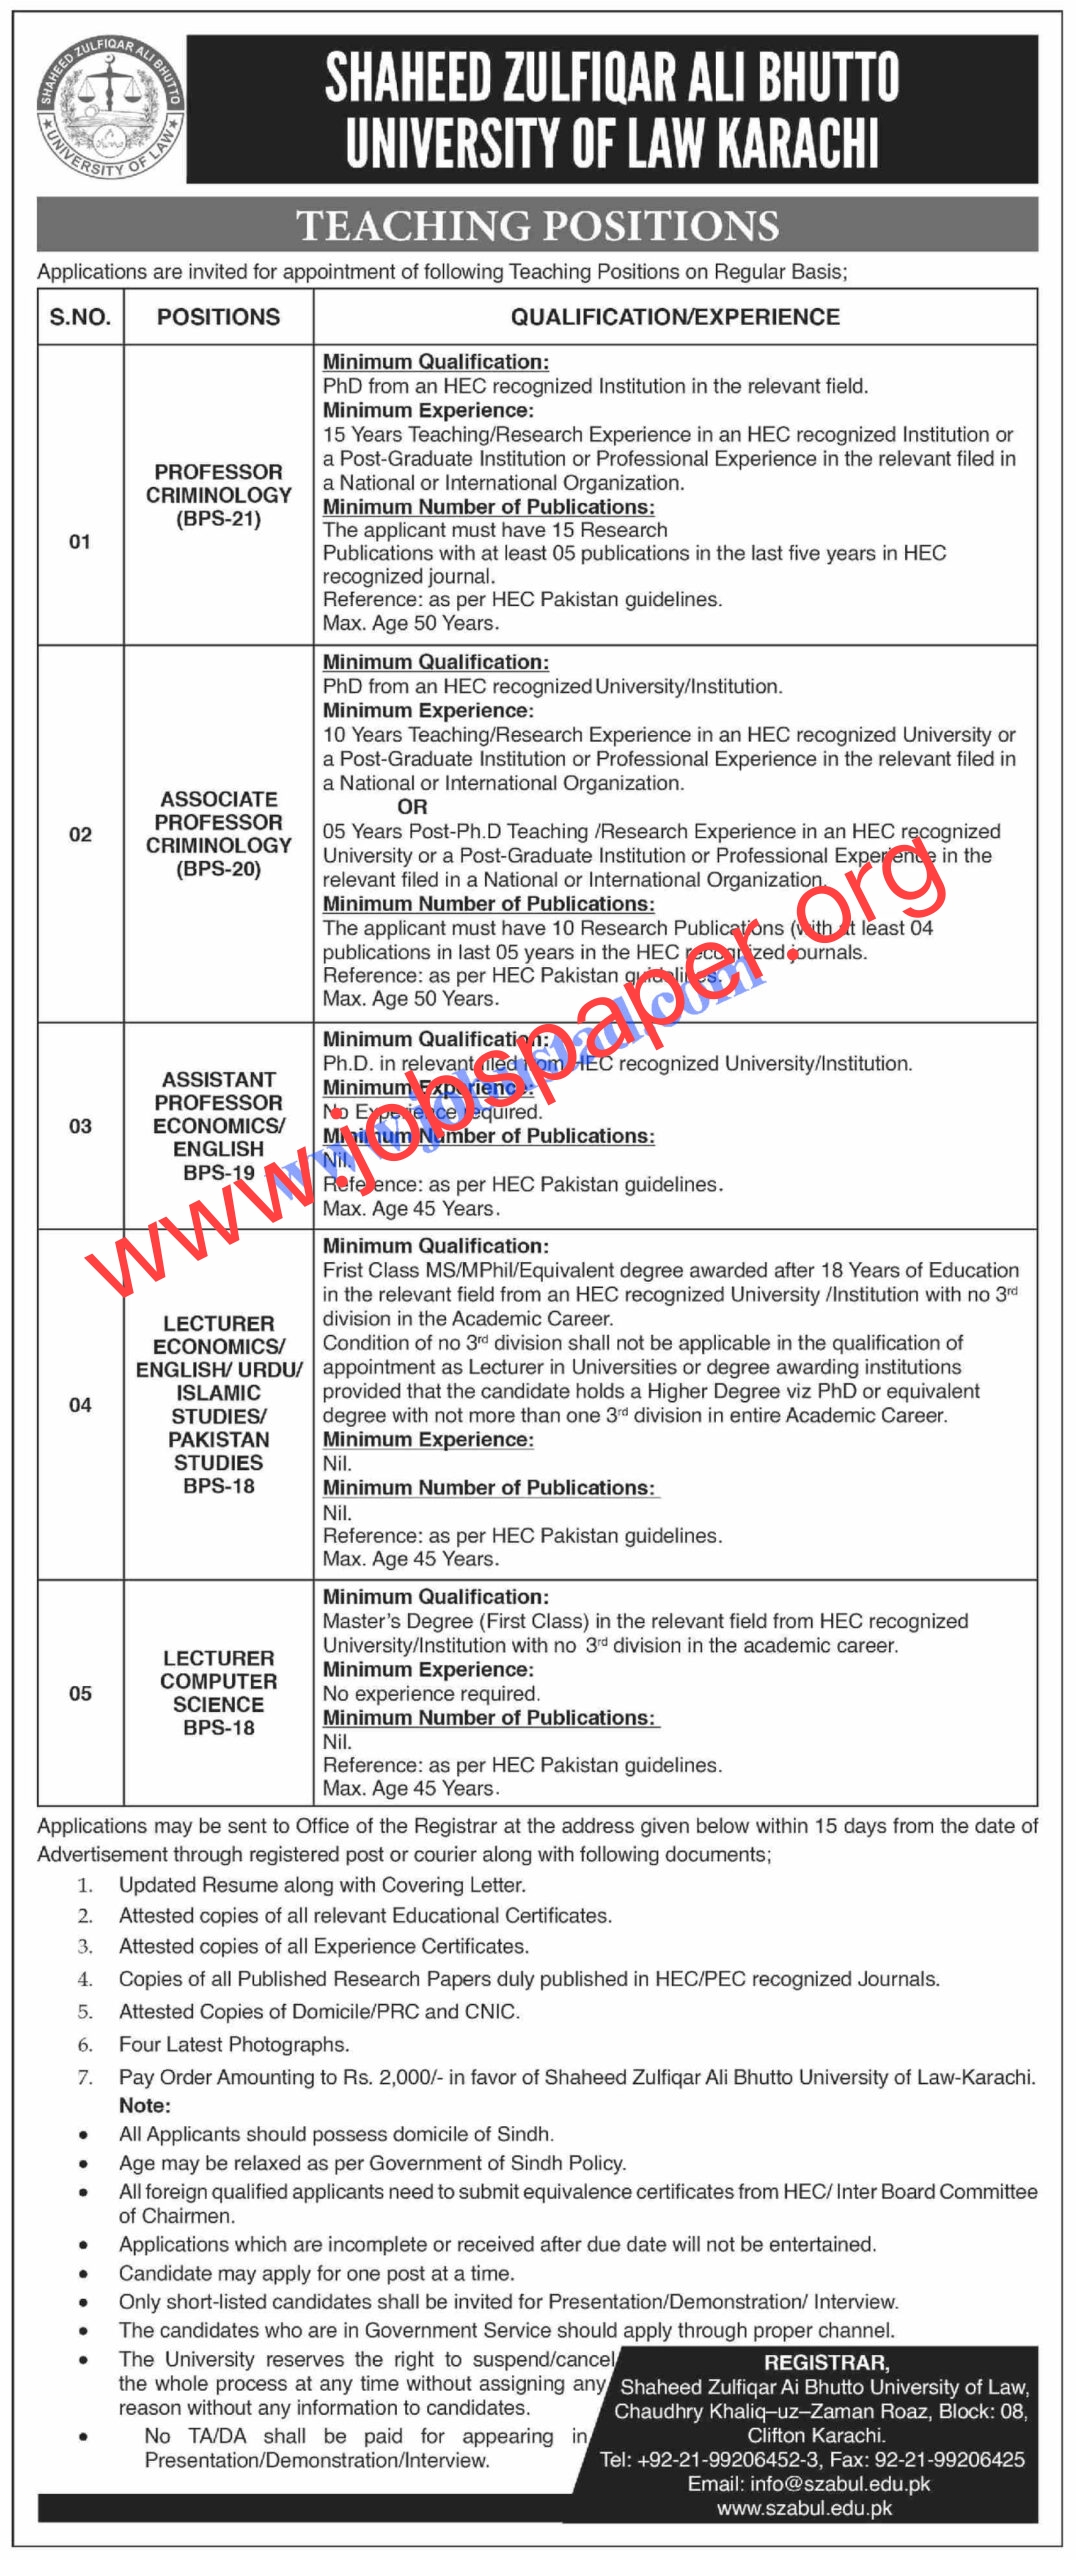 Jobs at the Shaheed Zulfiqar Ali Bhutto University of Law in Karachi will be available in 2022.